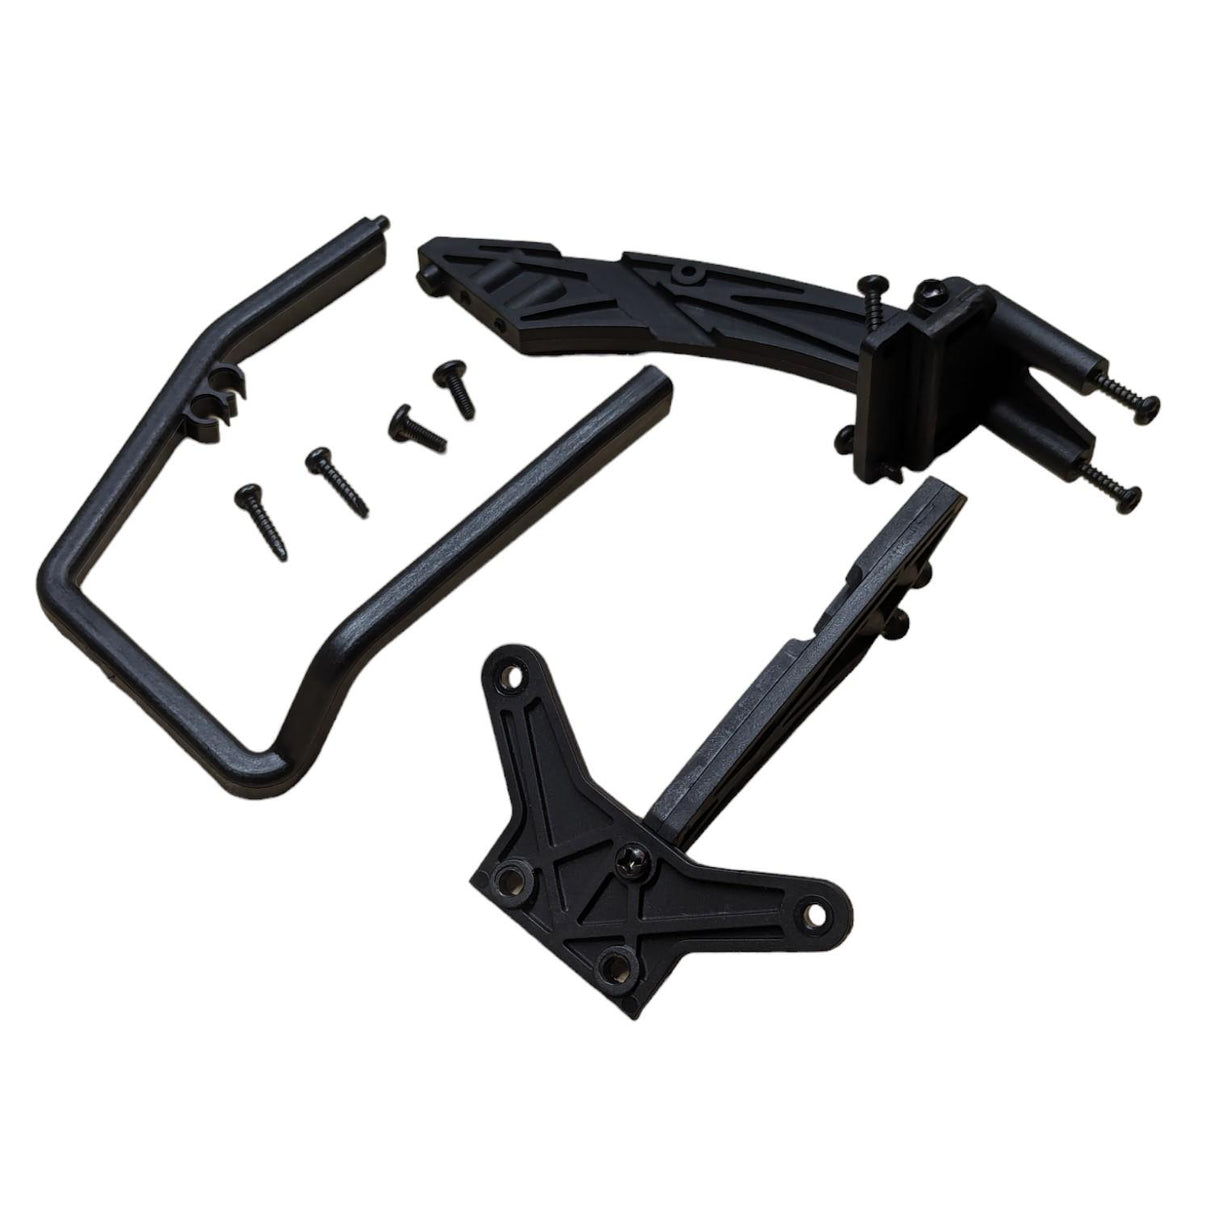 HPI Racing Chassis Brace Set and Support for Bullet & WR8 (Breaker Part)